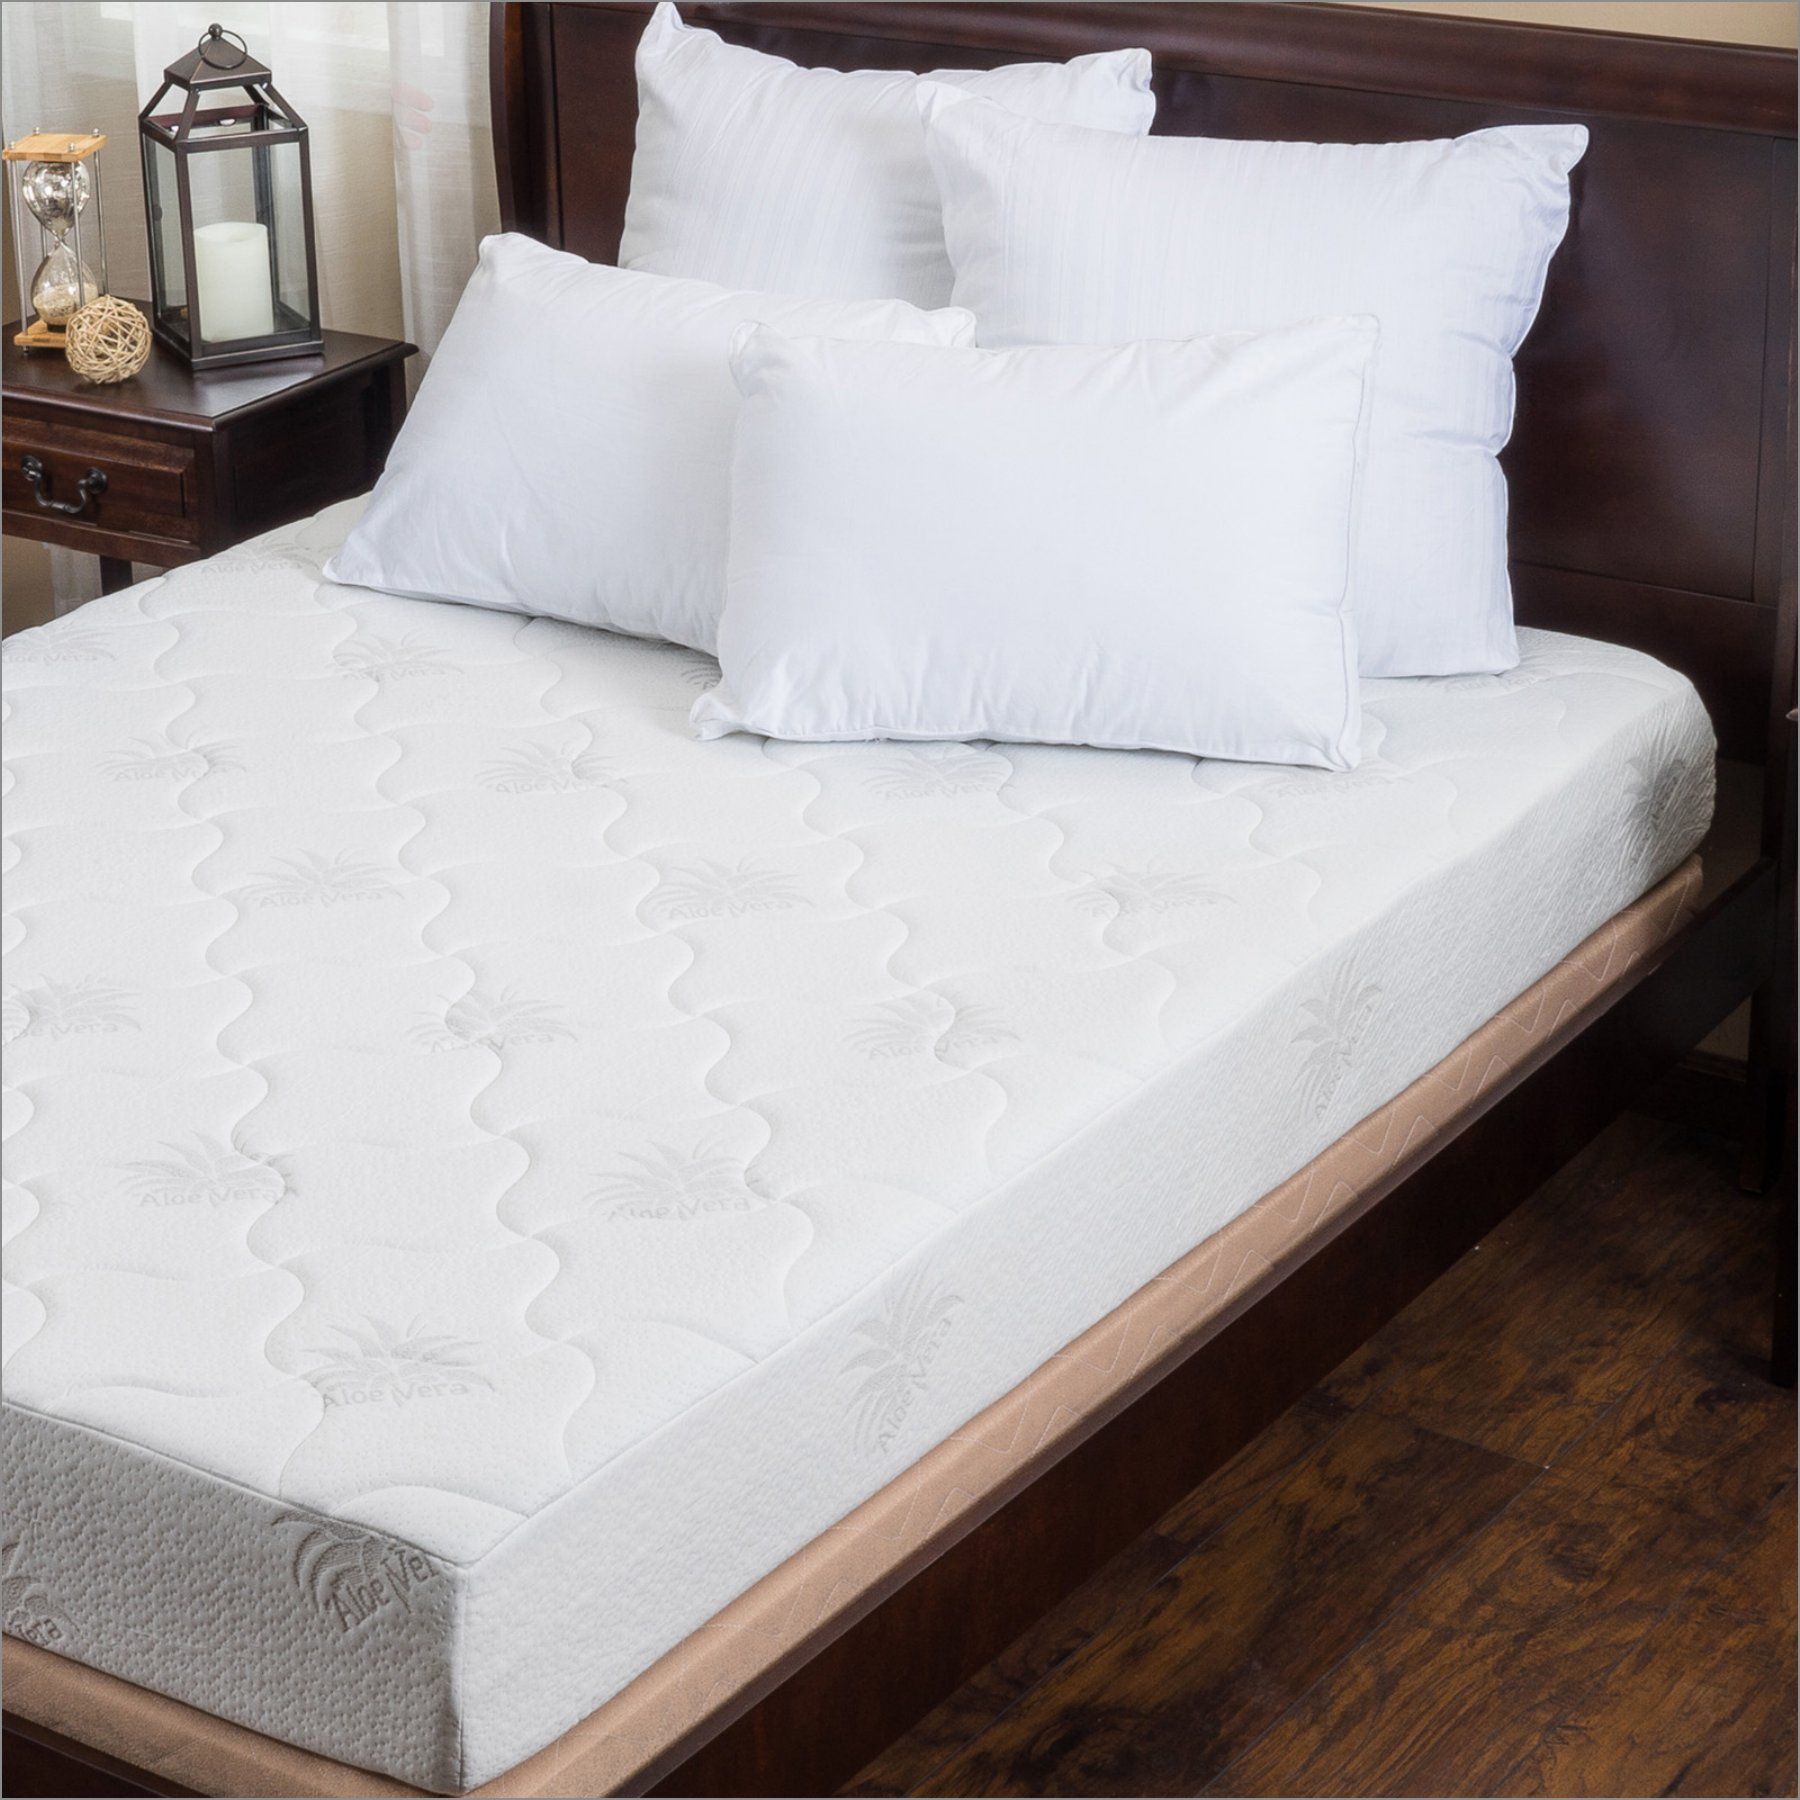 How Much Does A Queen Size Tempurpedic Mattress Cost Check more at ...